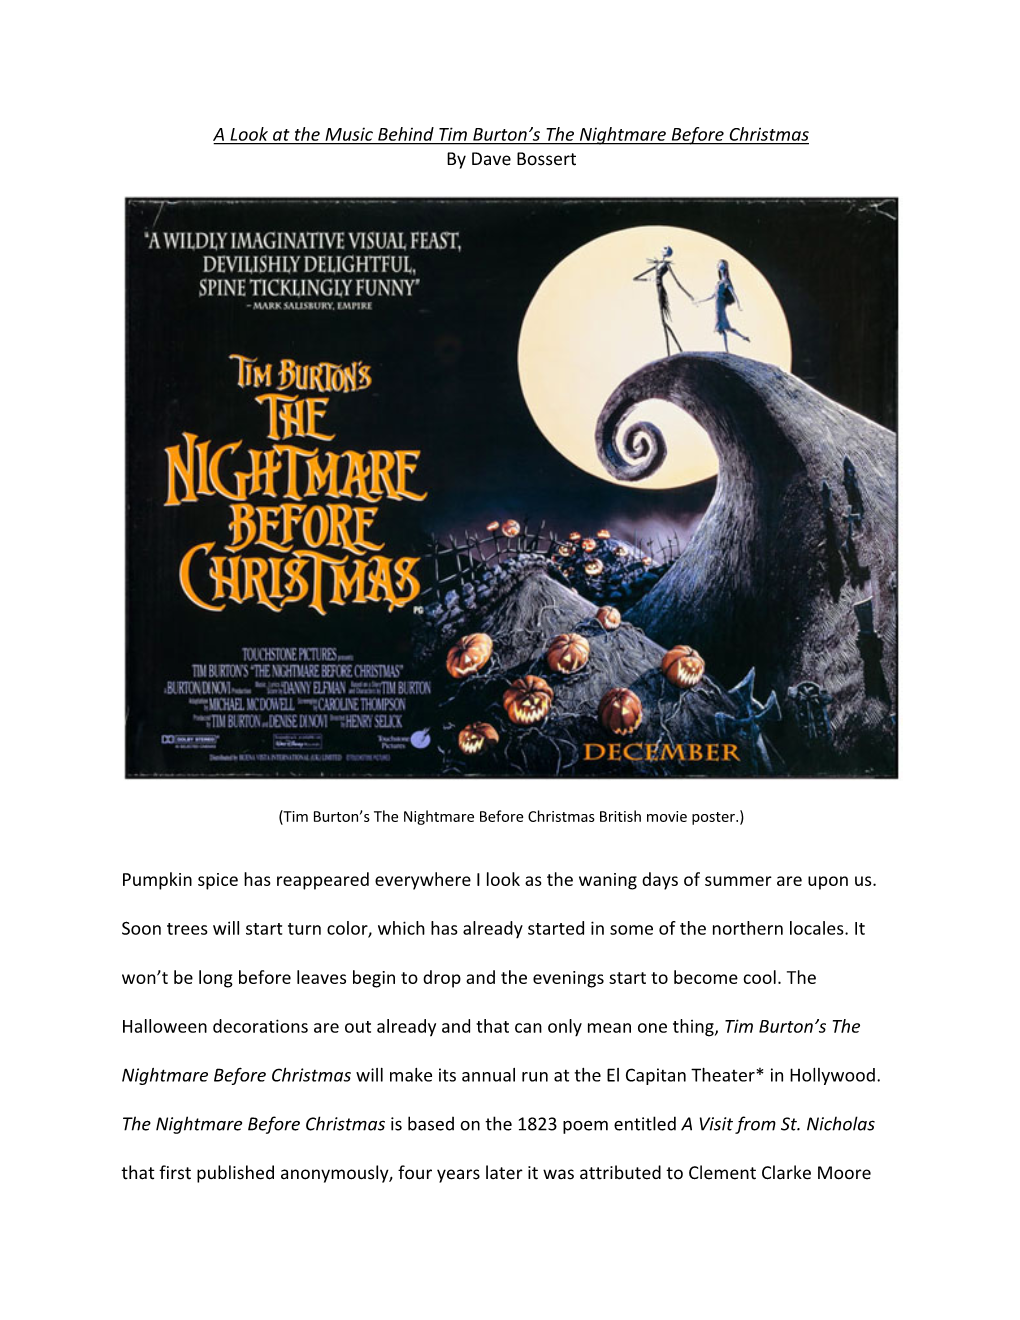 The Nightmare Before Christmas by Dave Bossert